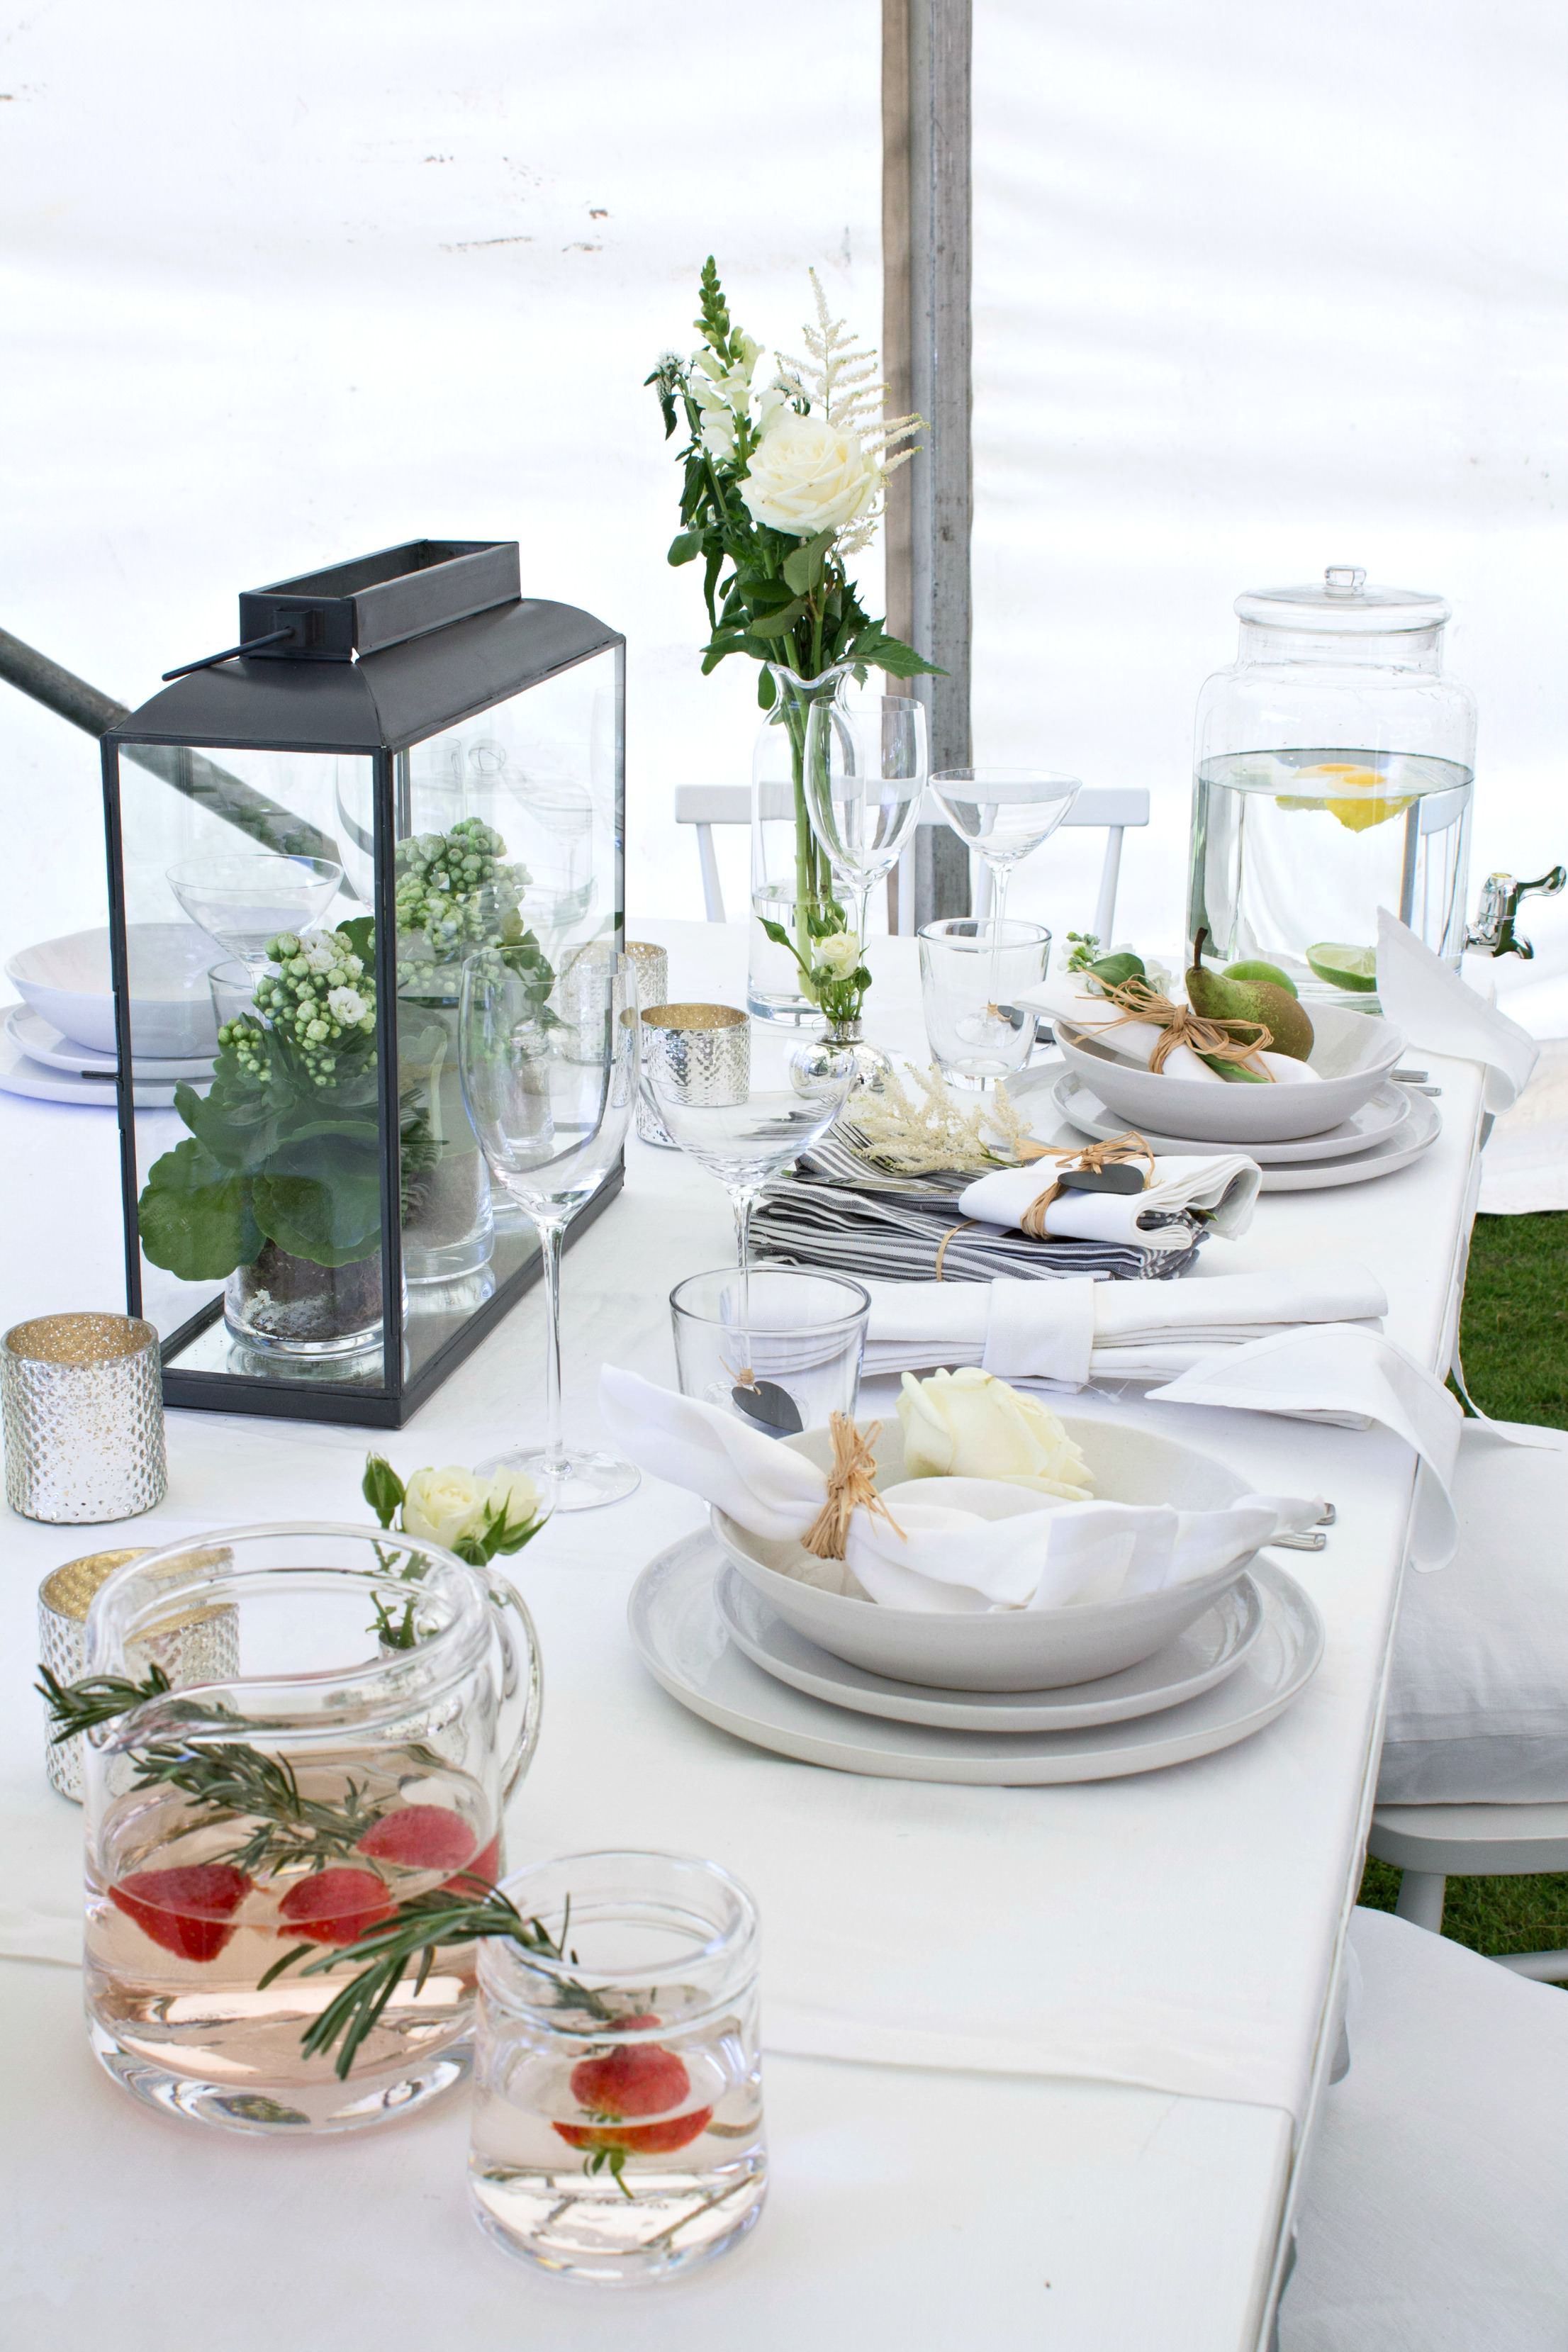 Summer-Entertaining-table-1-The-White-Company-photo-by-Geraldine-Tan-Little-Big-Bell